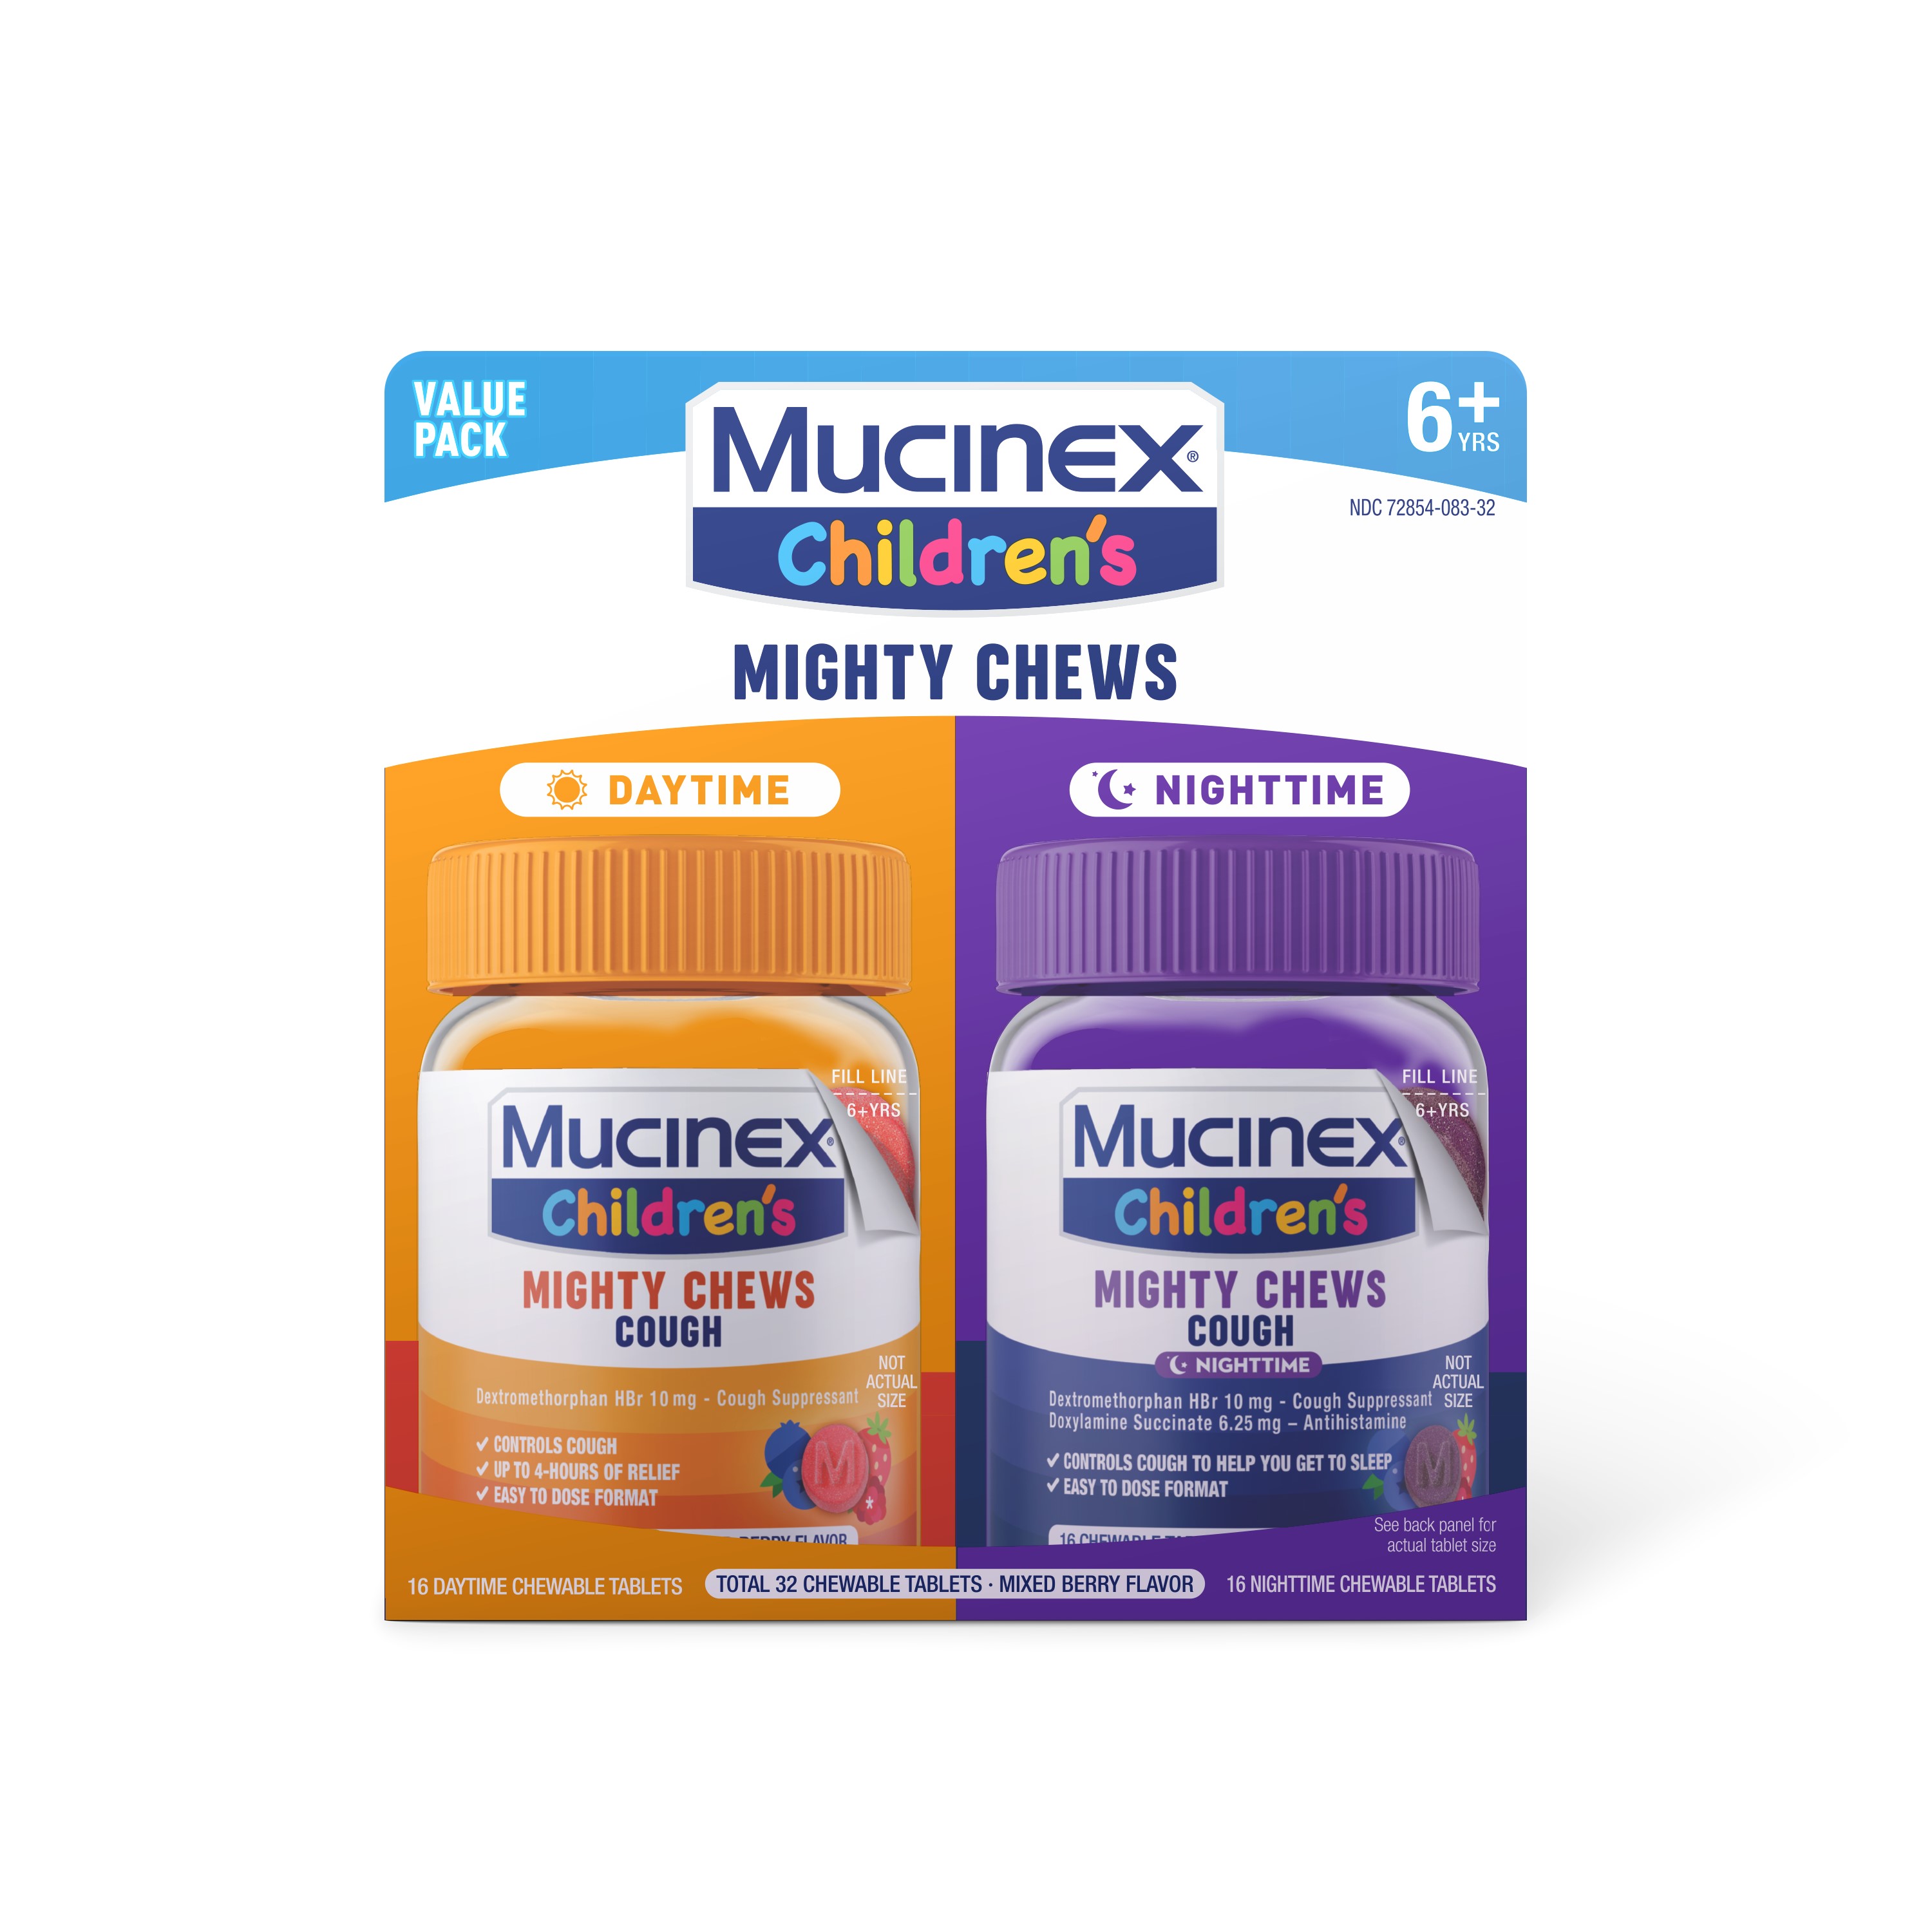 MUCINEX Childrens Mighty Chews  Cough Combo Pack Daytime